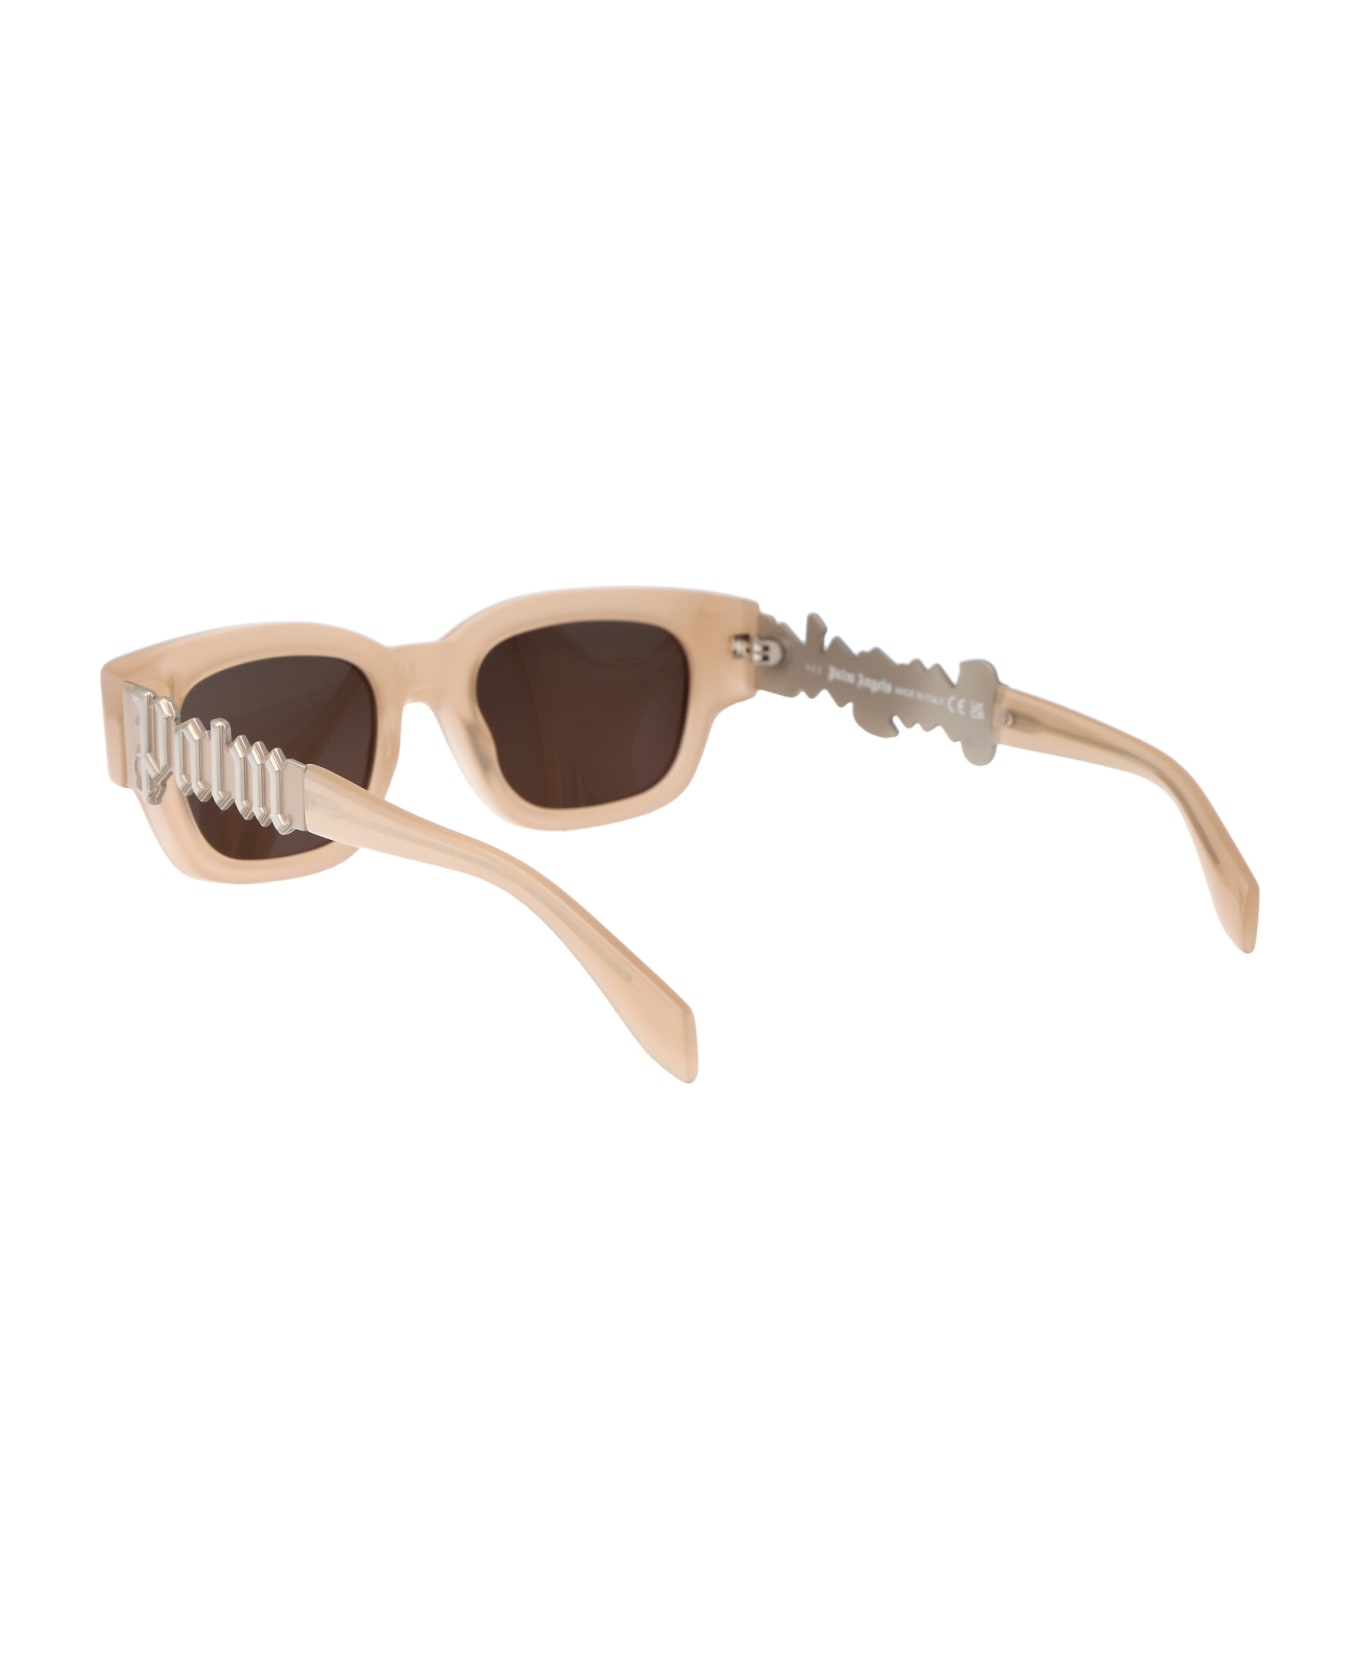 Palm Angels Posey Sunglasses - 1764 NUDE